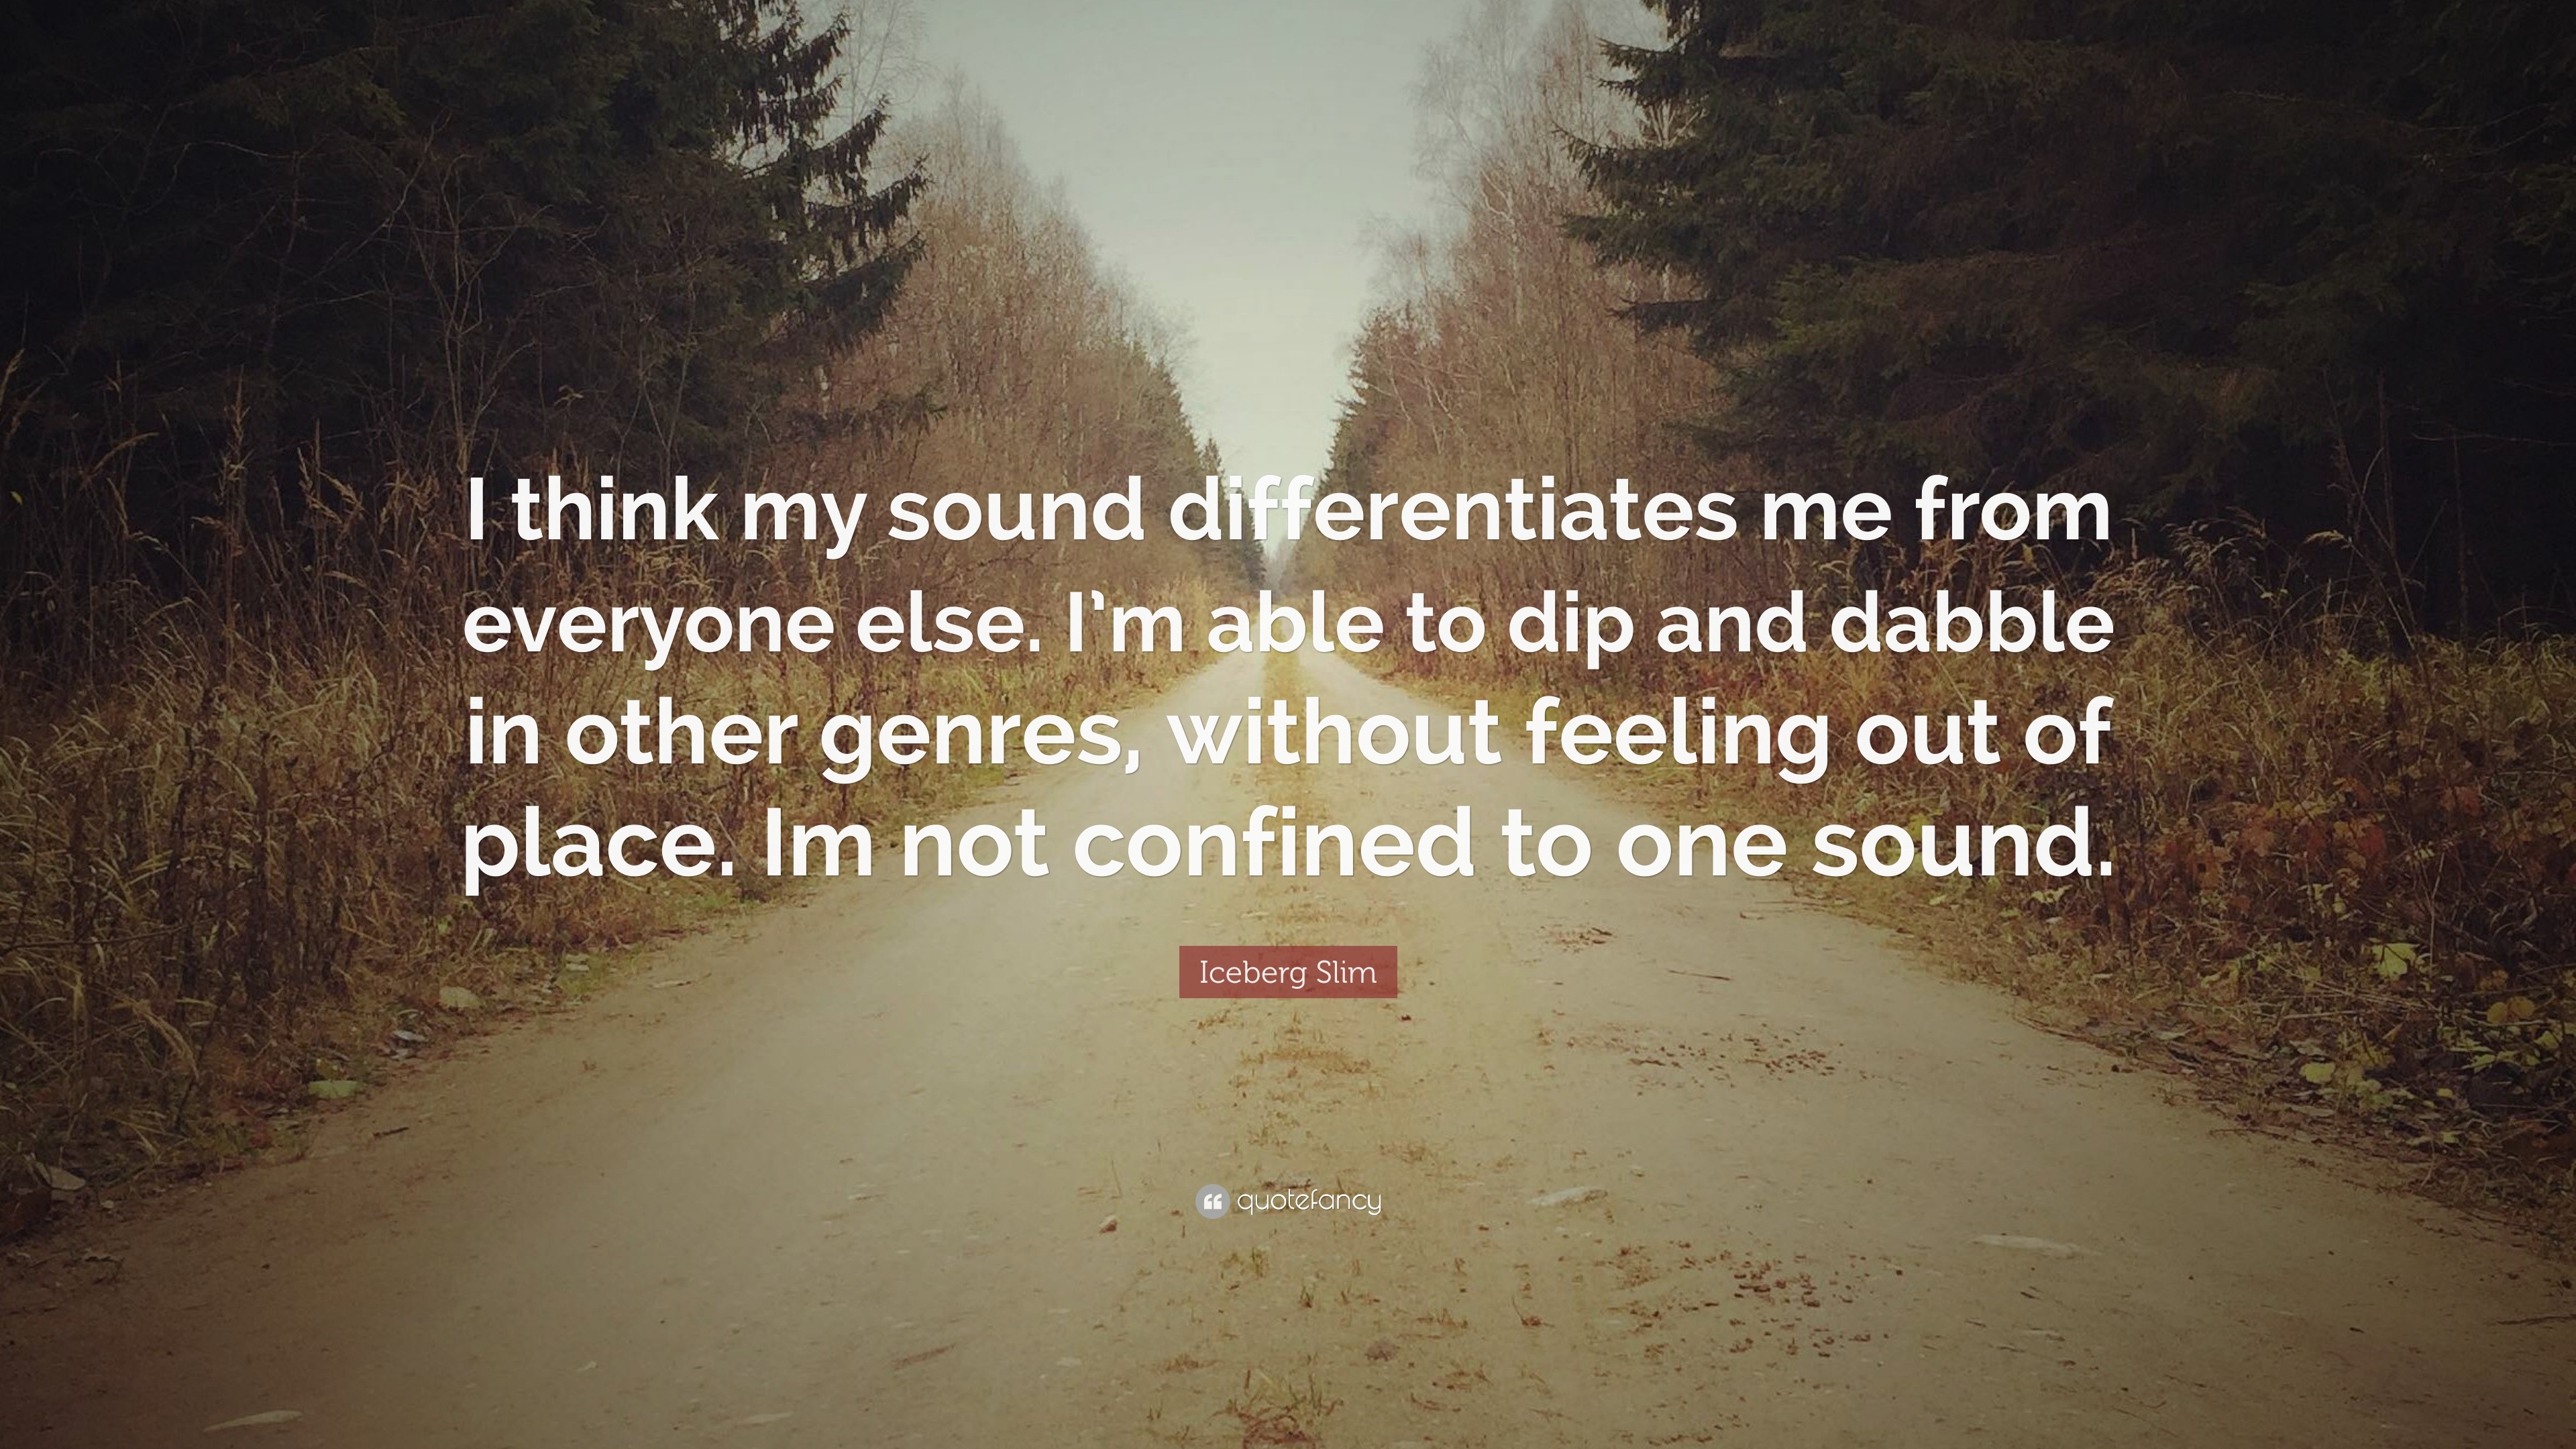 Iceberg Slim Quote: “I think my sound differentiates me from everyone